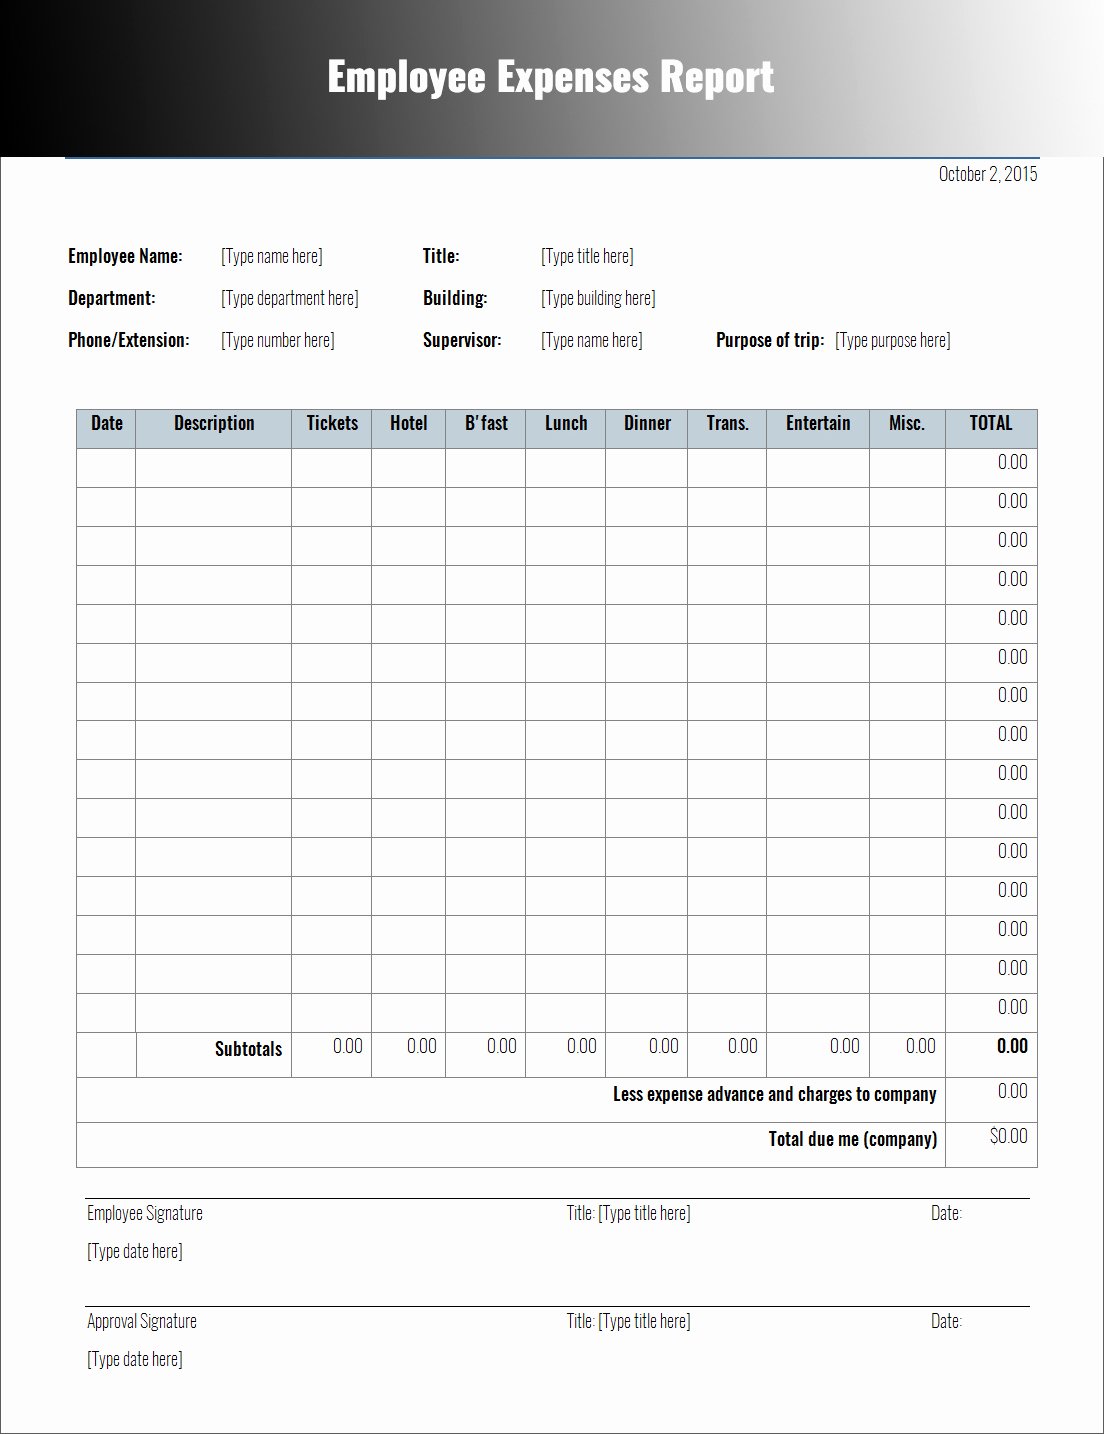 Monthly Expense Report Template Inspirational 15 Professional Samples to Create Business Annual Expense